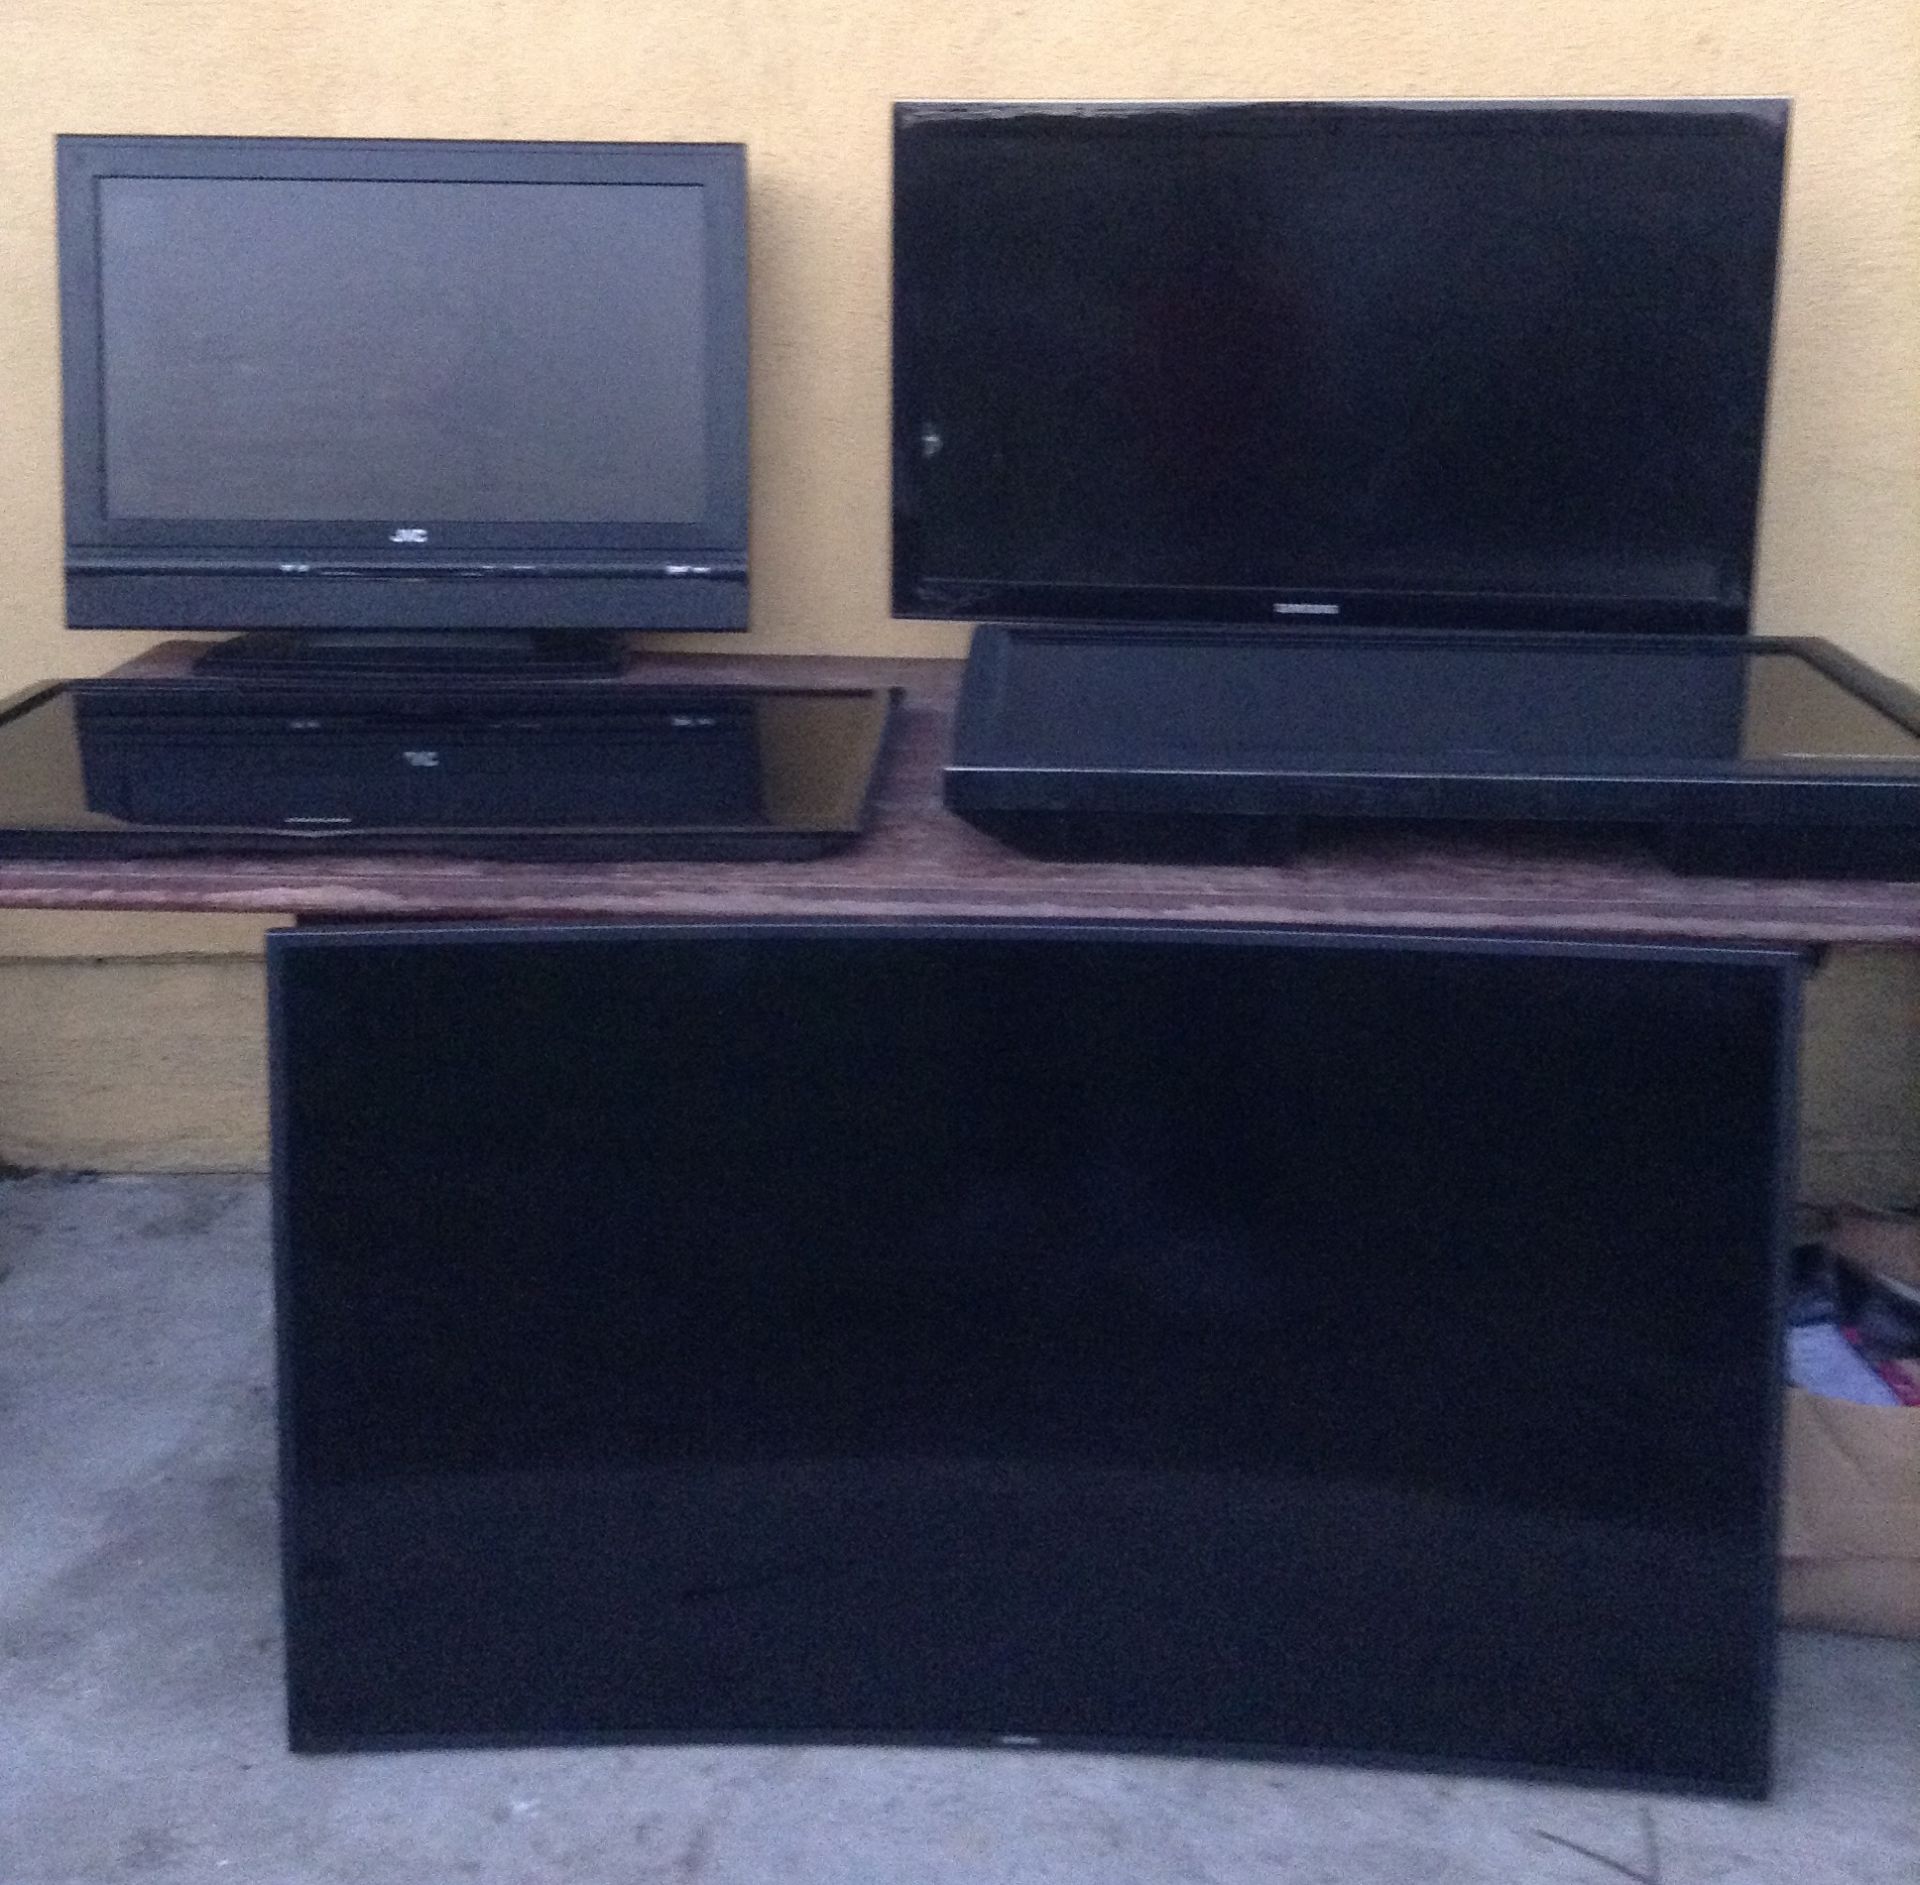 TV SCREEN LOT, LCD CURVED TV FOR PARTS UNKNOWN CONDITON